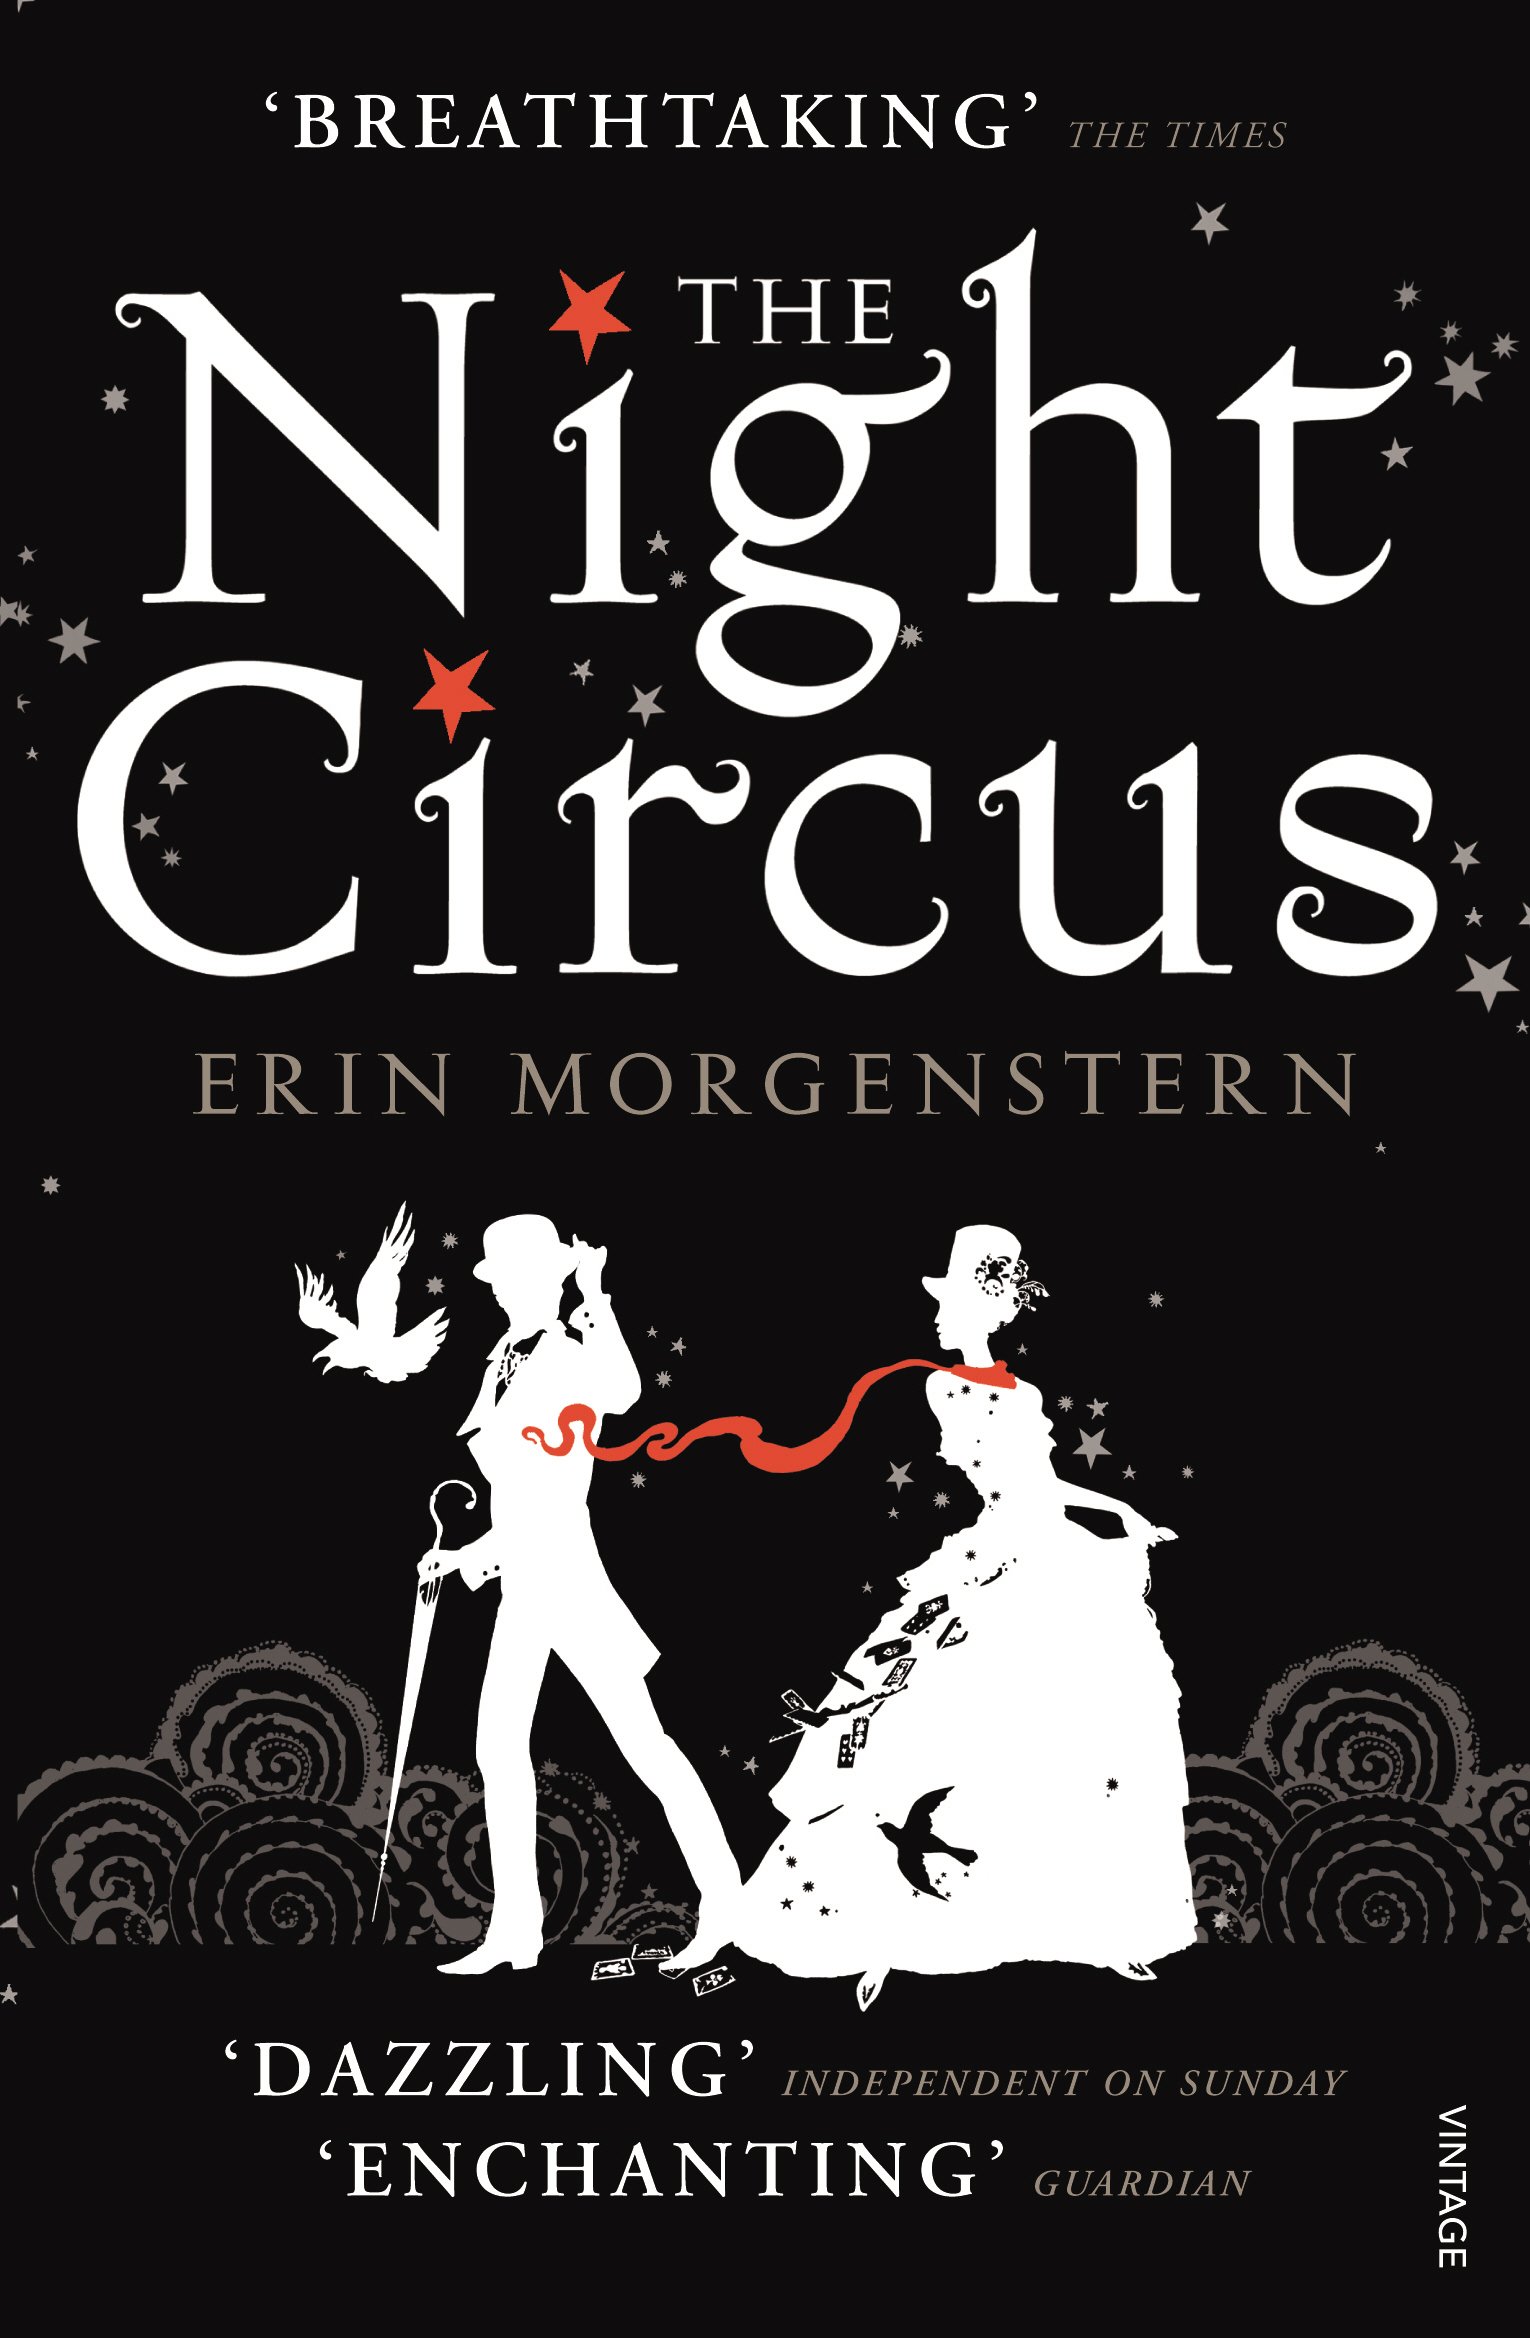 The Night Circus, a novel by Erin Morgenstern